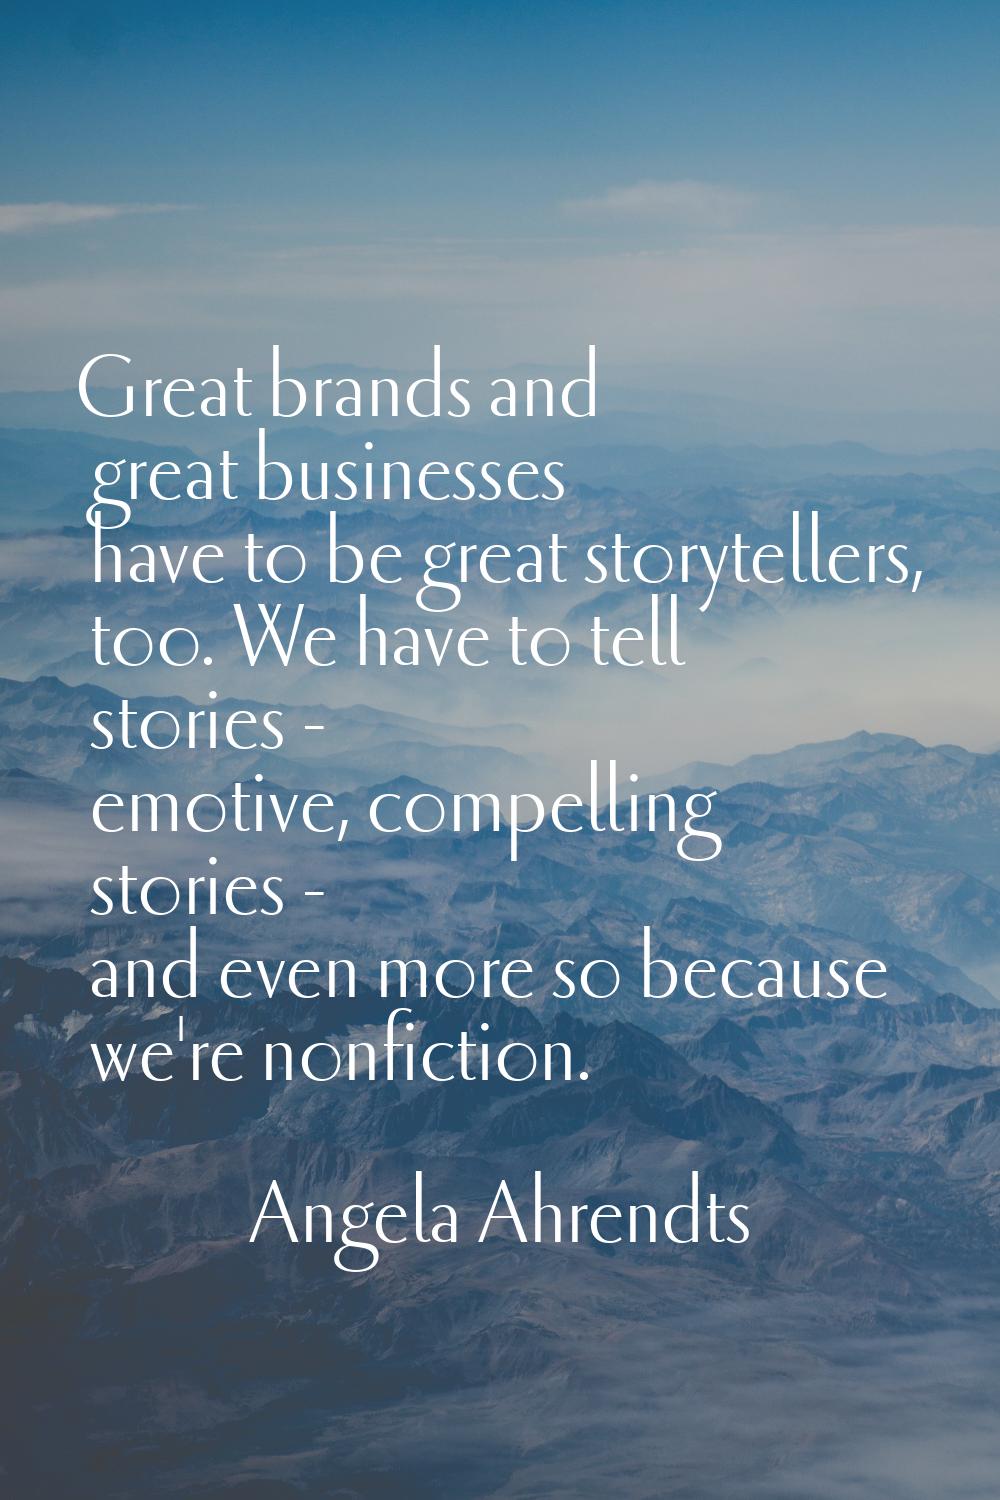 Great brands and great businesses have to be great storytellers, too. We have to tell stories - emo